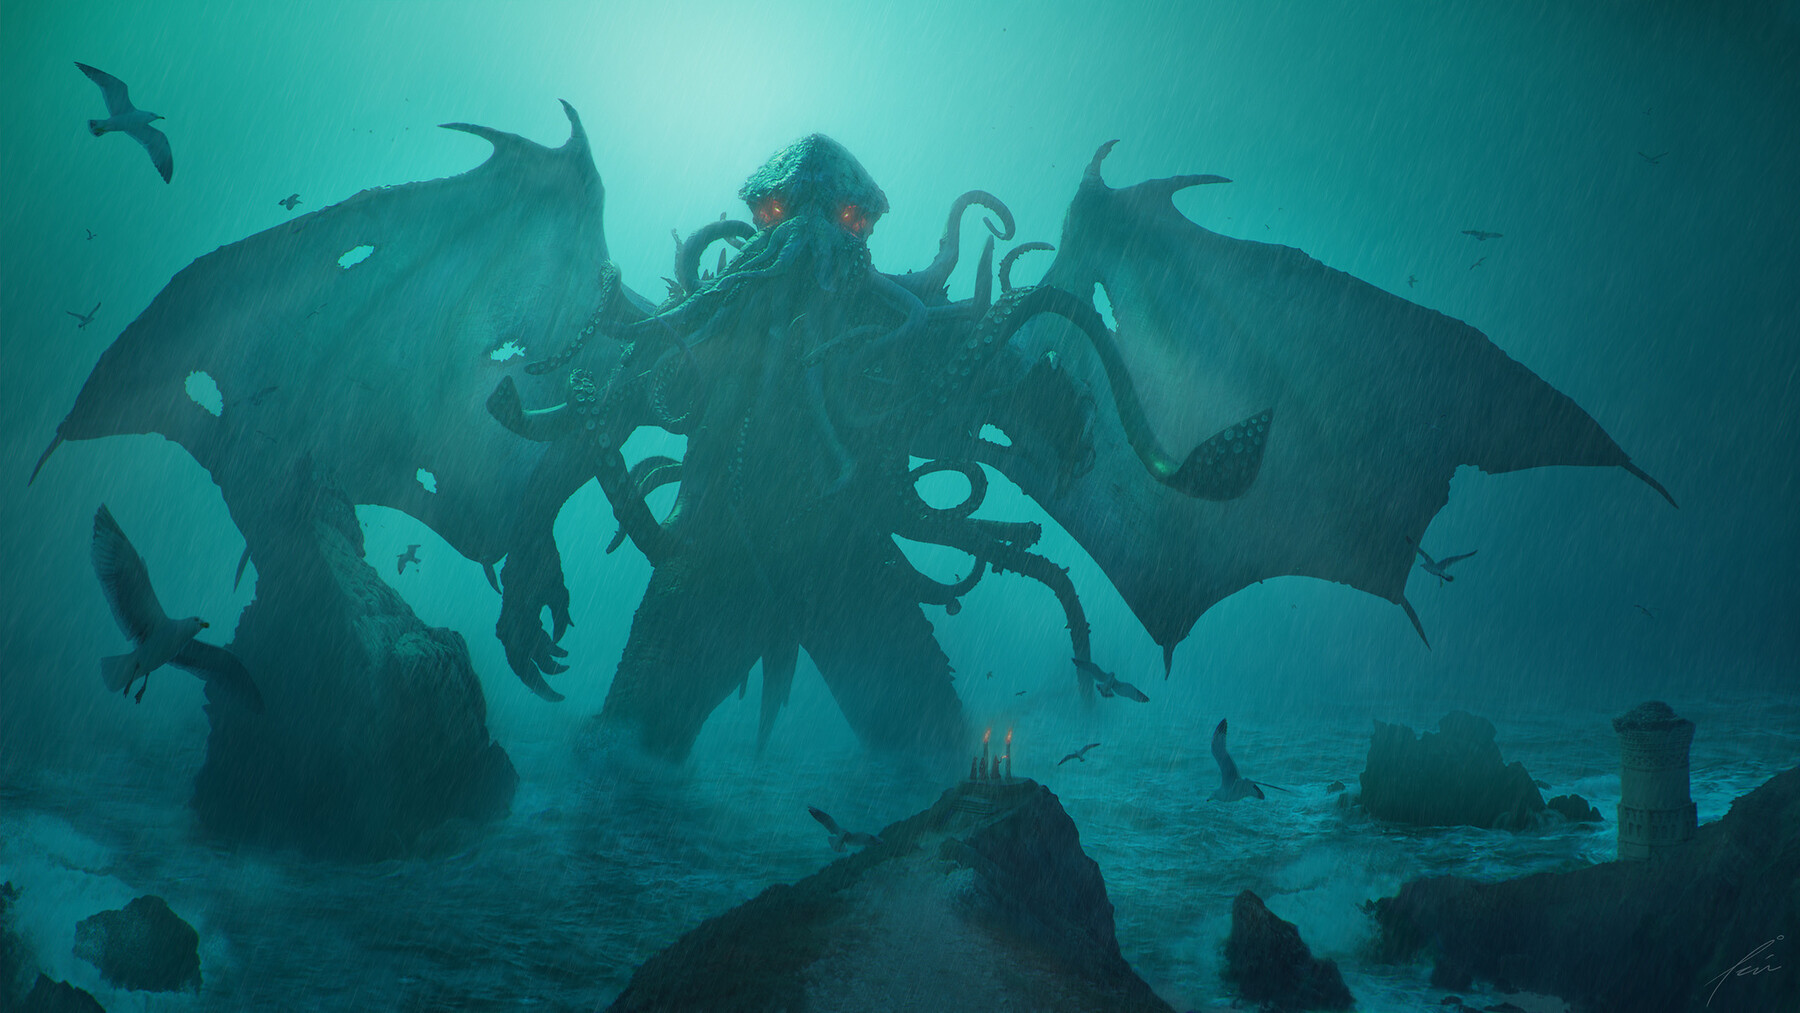 Cthulhu Rigged - 3D Model by NoneCG